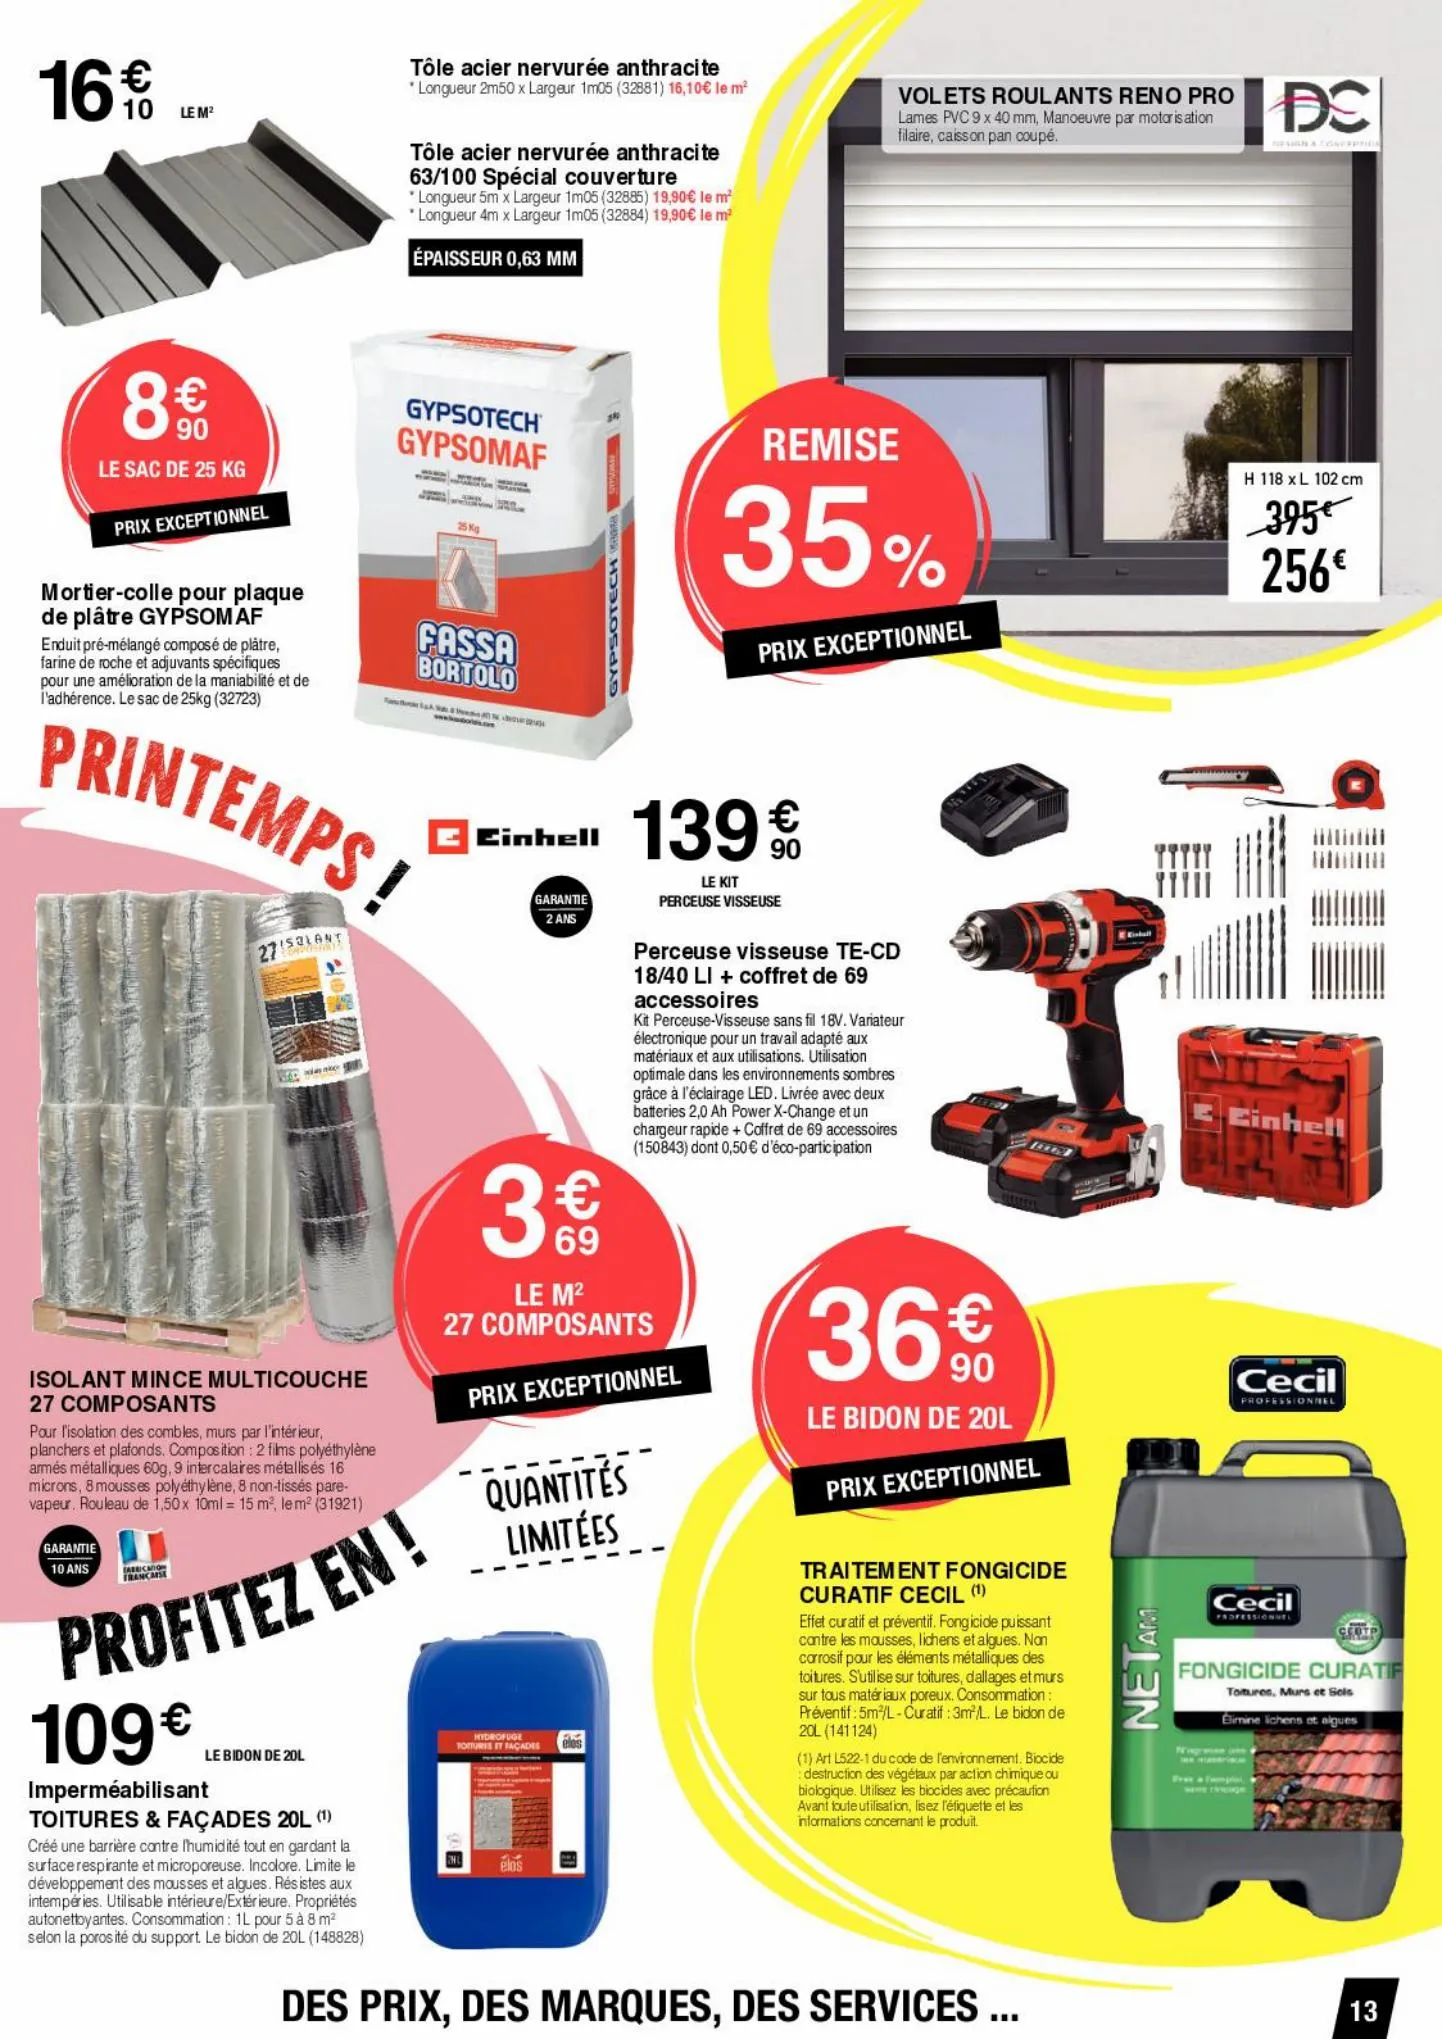 Catalogue Promo Avril 2023 Chretien, page 00013